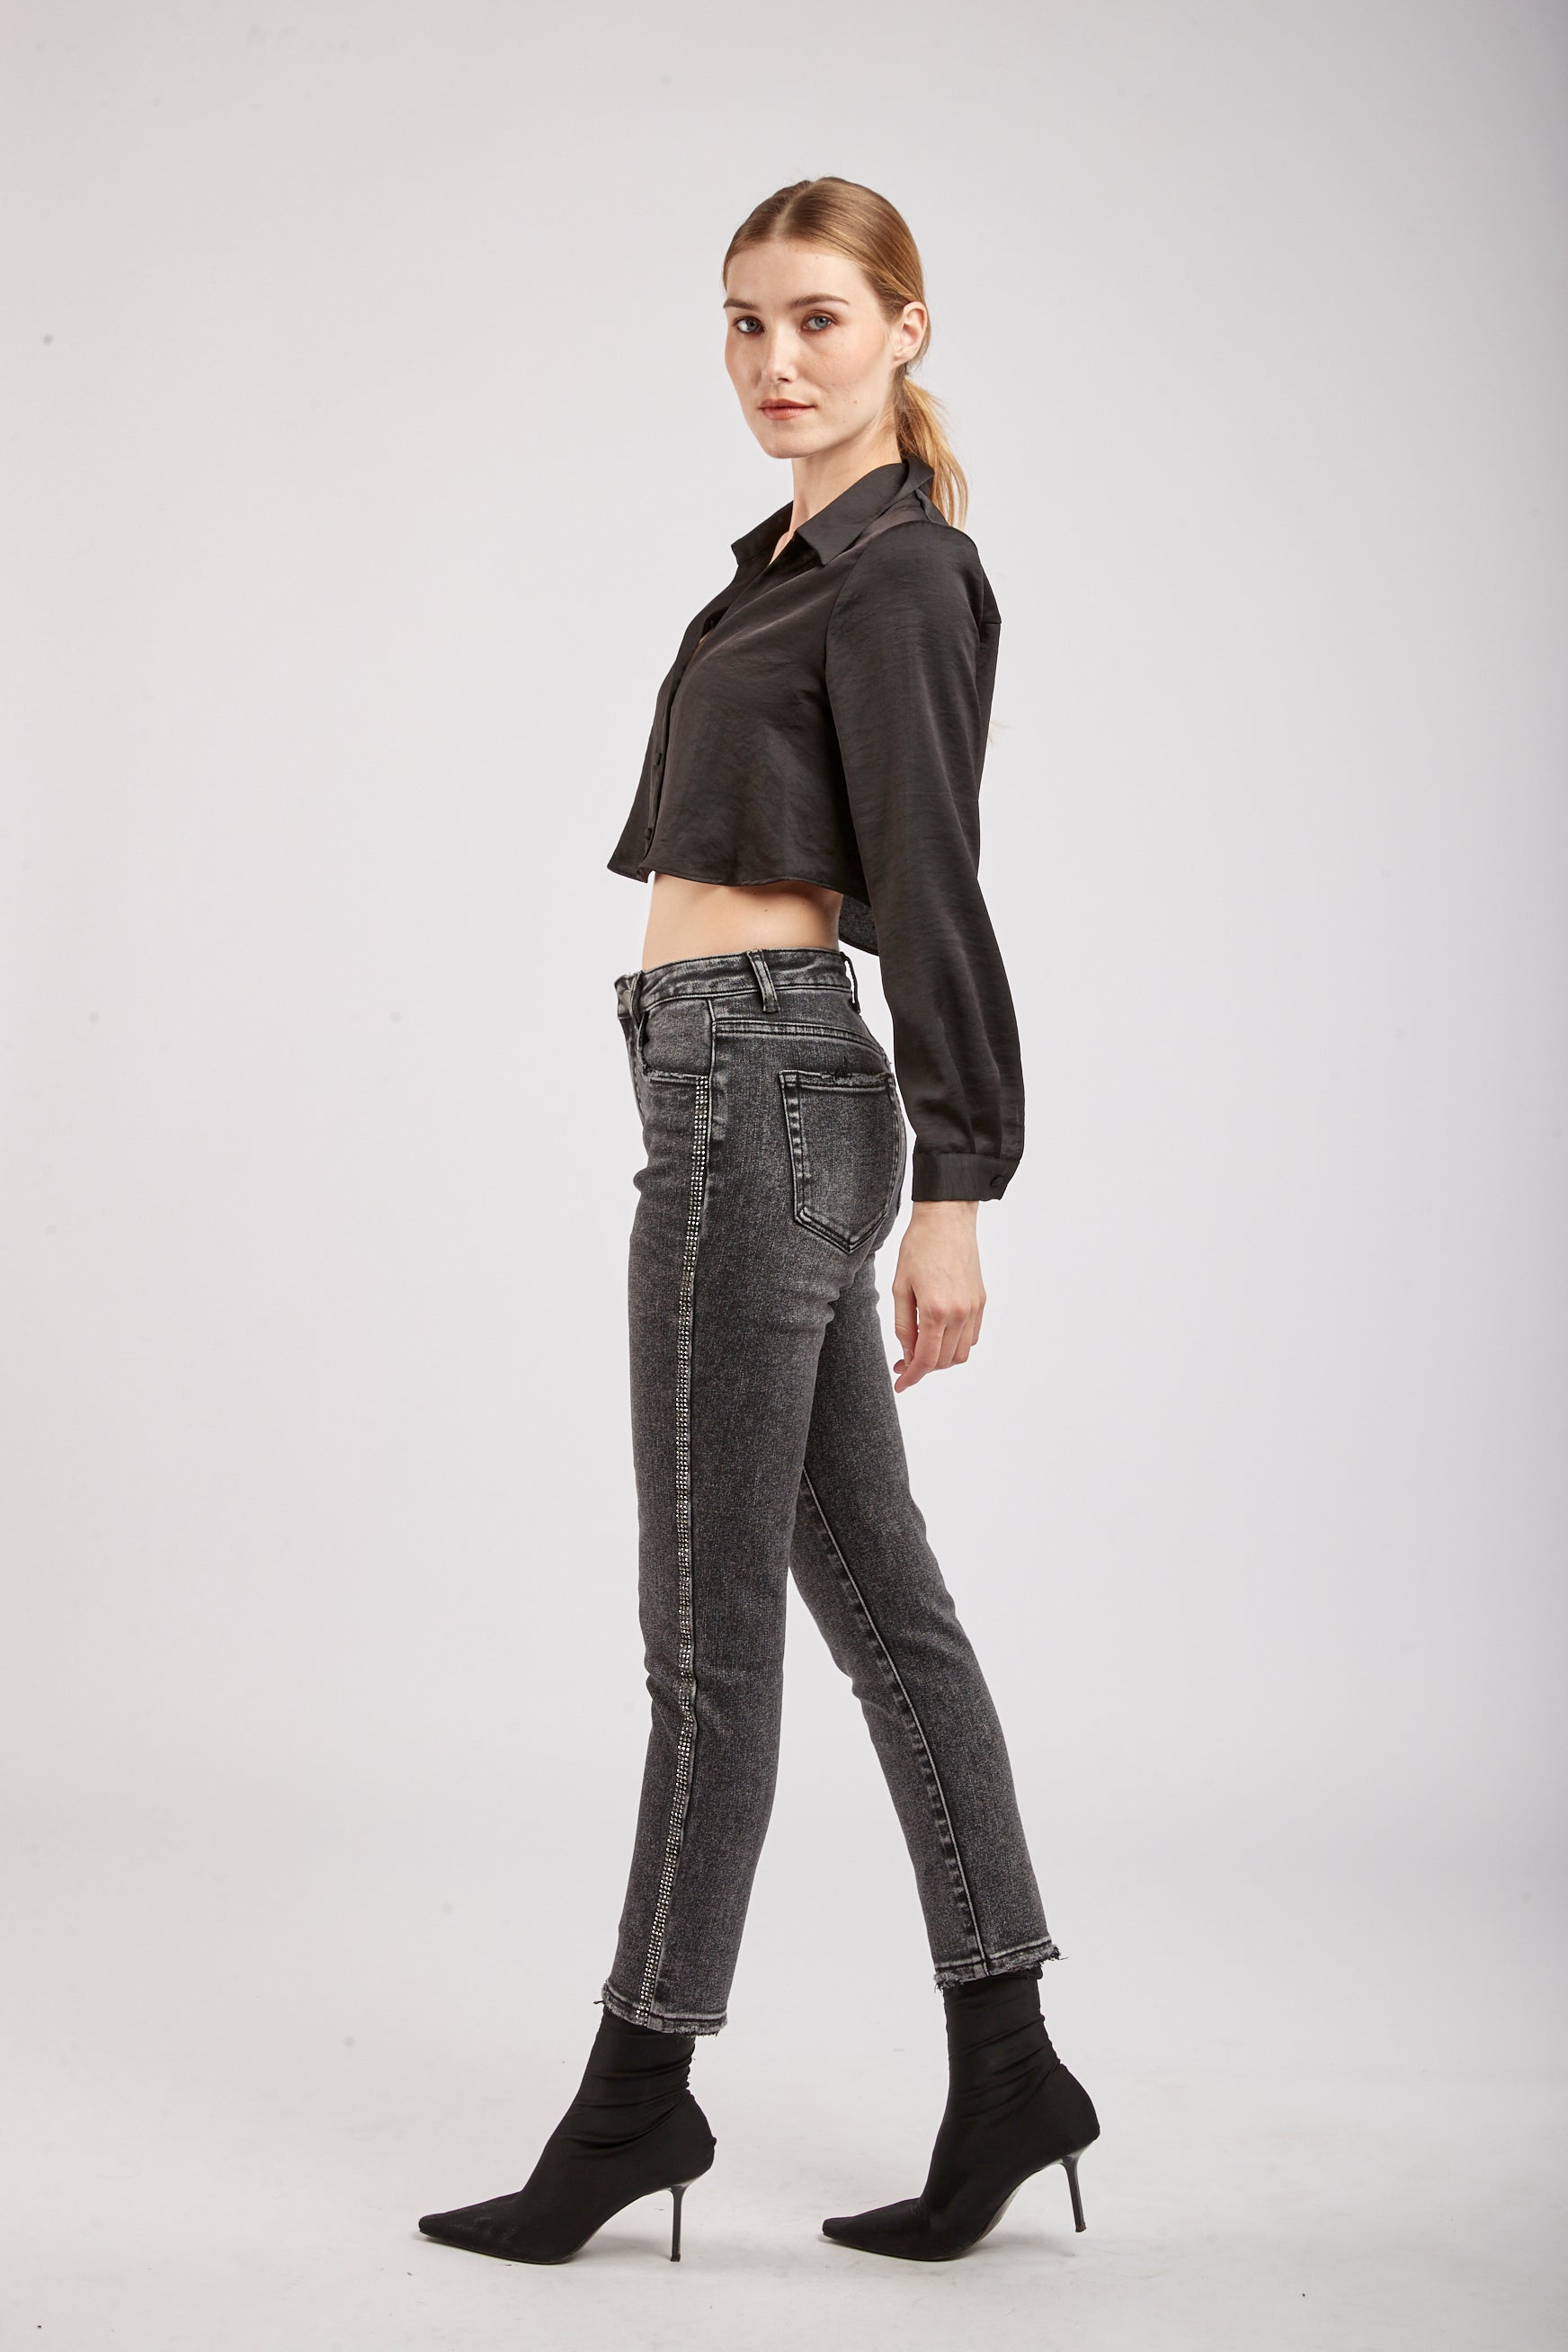 Flavified Jeans Details Strass on the Side - Broken